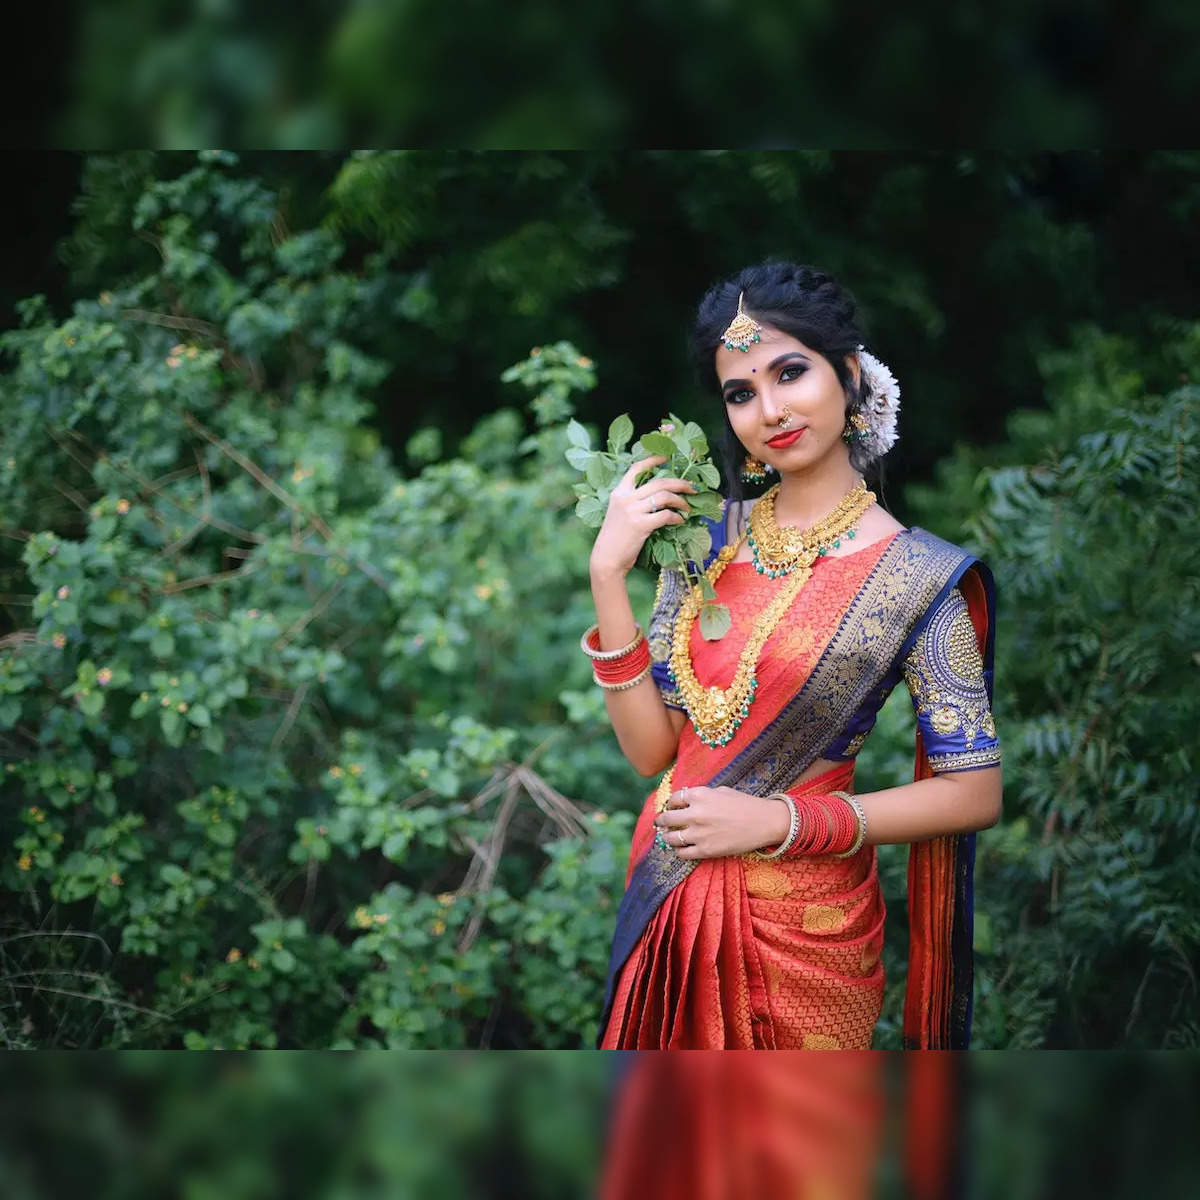 Photoshoot Poses For Girls In Saree # Model Photoshoot Outdoor # New Style  Saree Wearing 2018 #Aarvi - YouTube